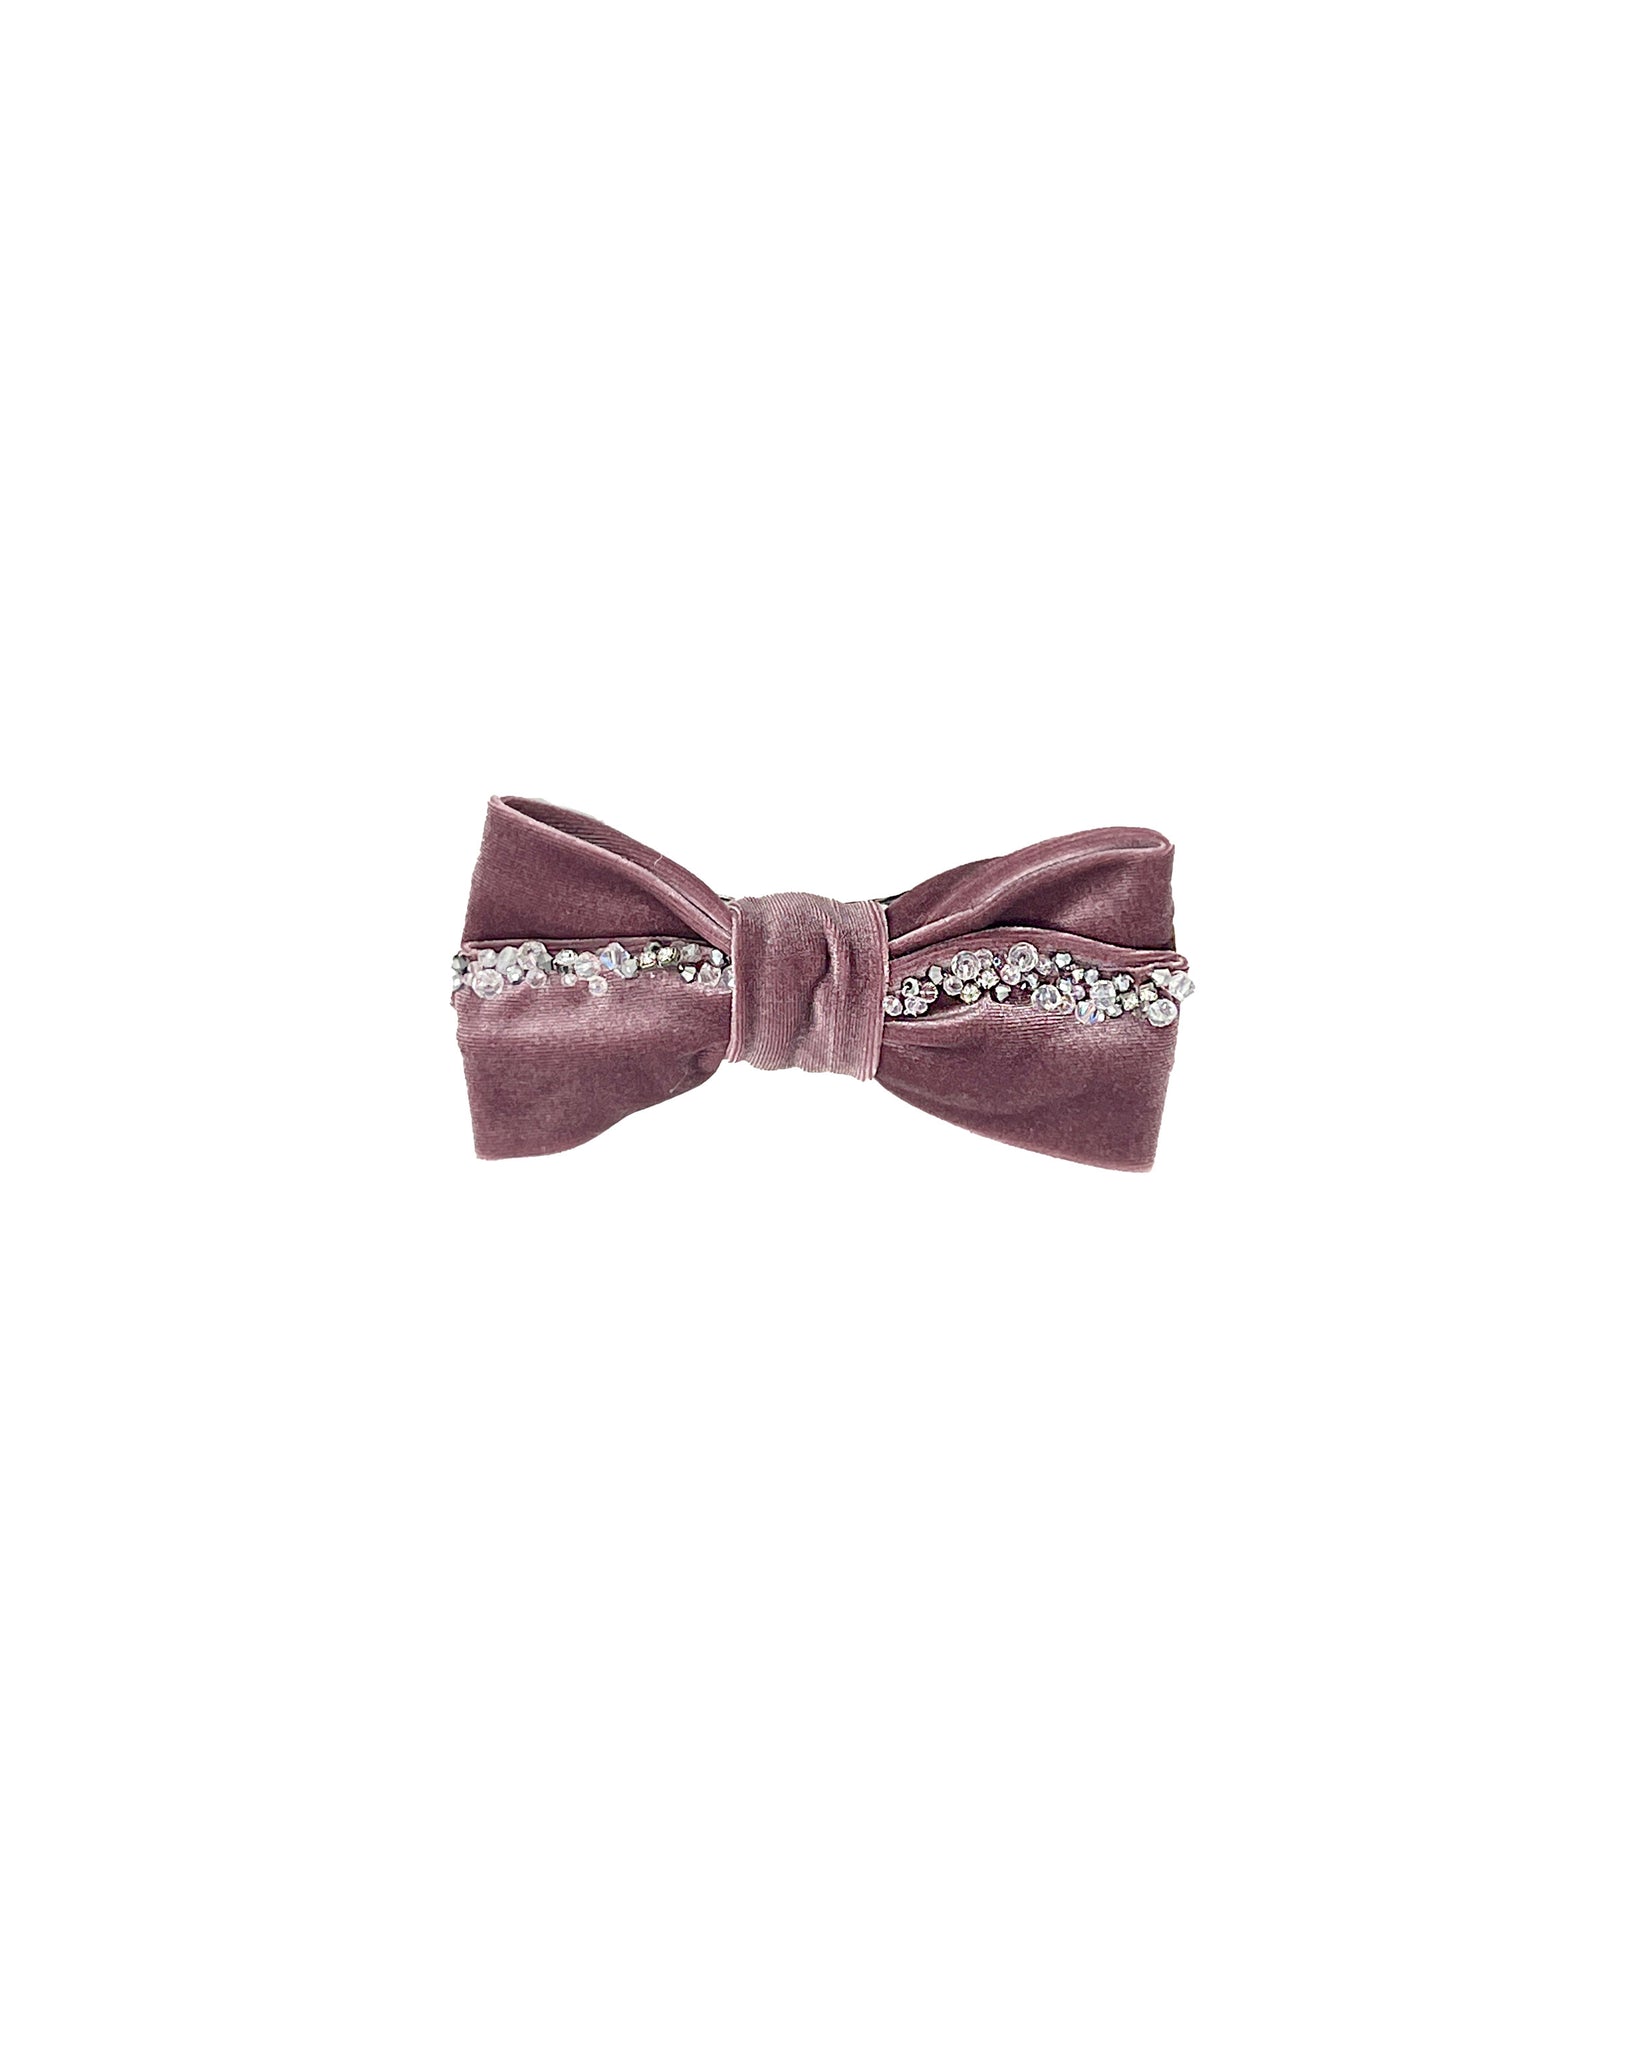 Embroidered dark pink velvet bow barrette with crystals